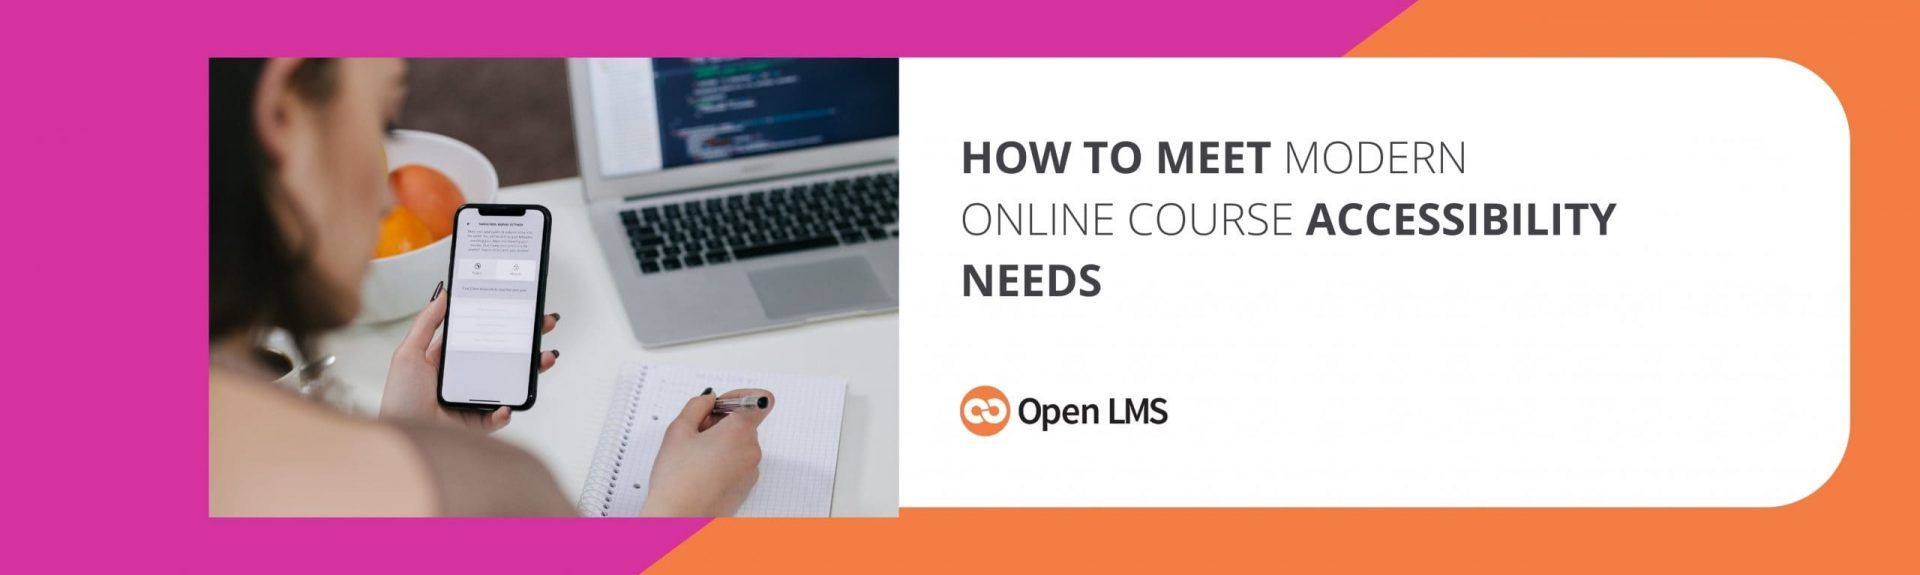 How to Meet Modern Online Course Accessibility Needs